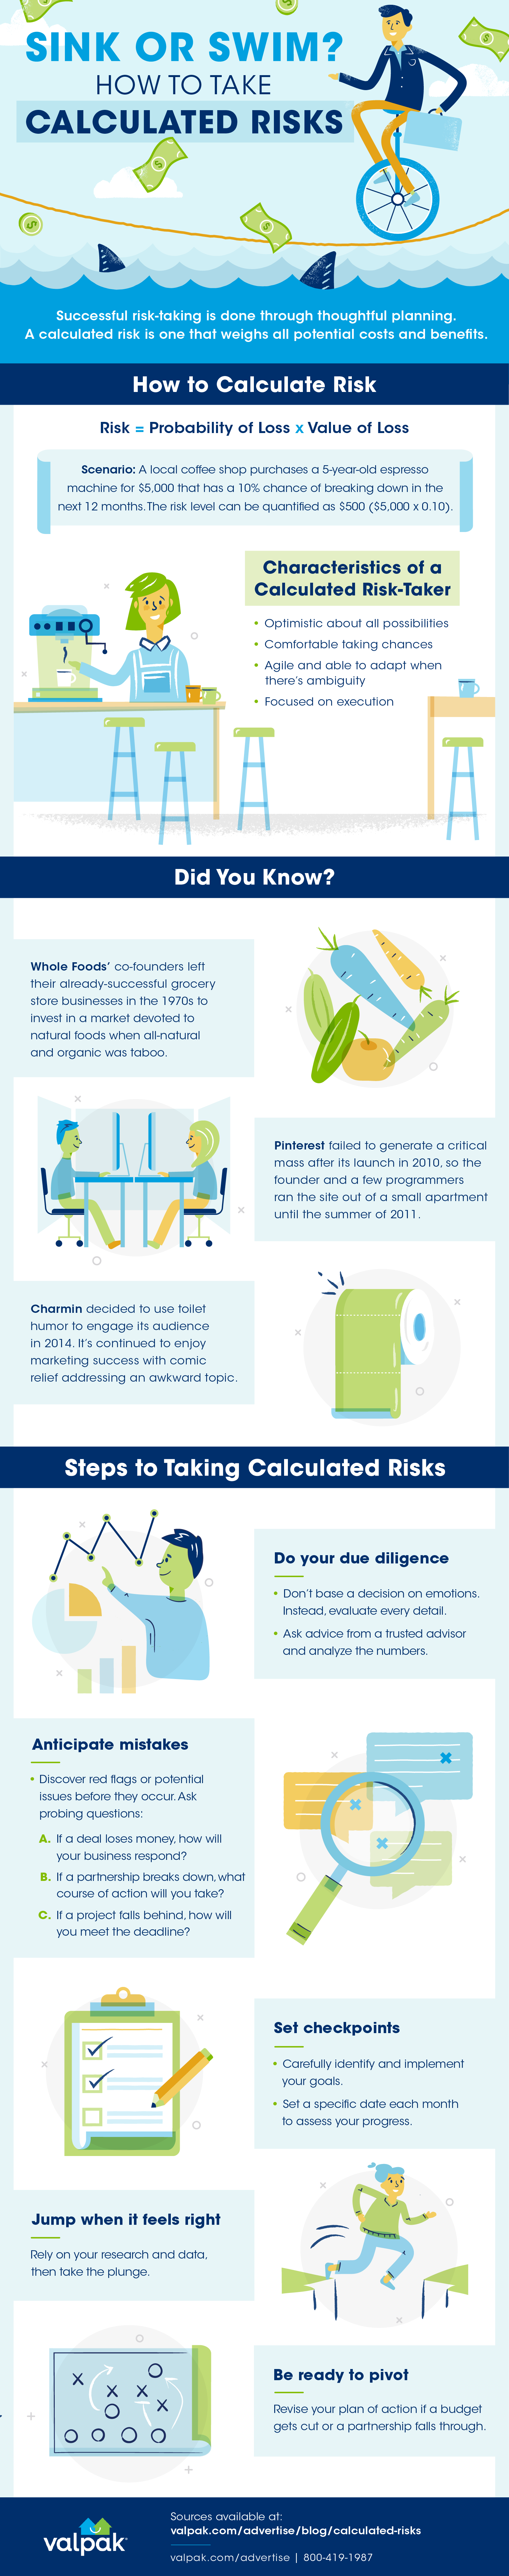 how to take calculated risks infographic